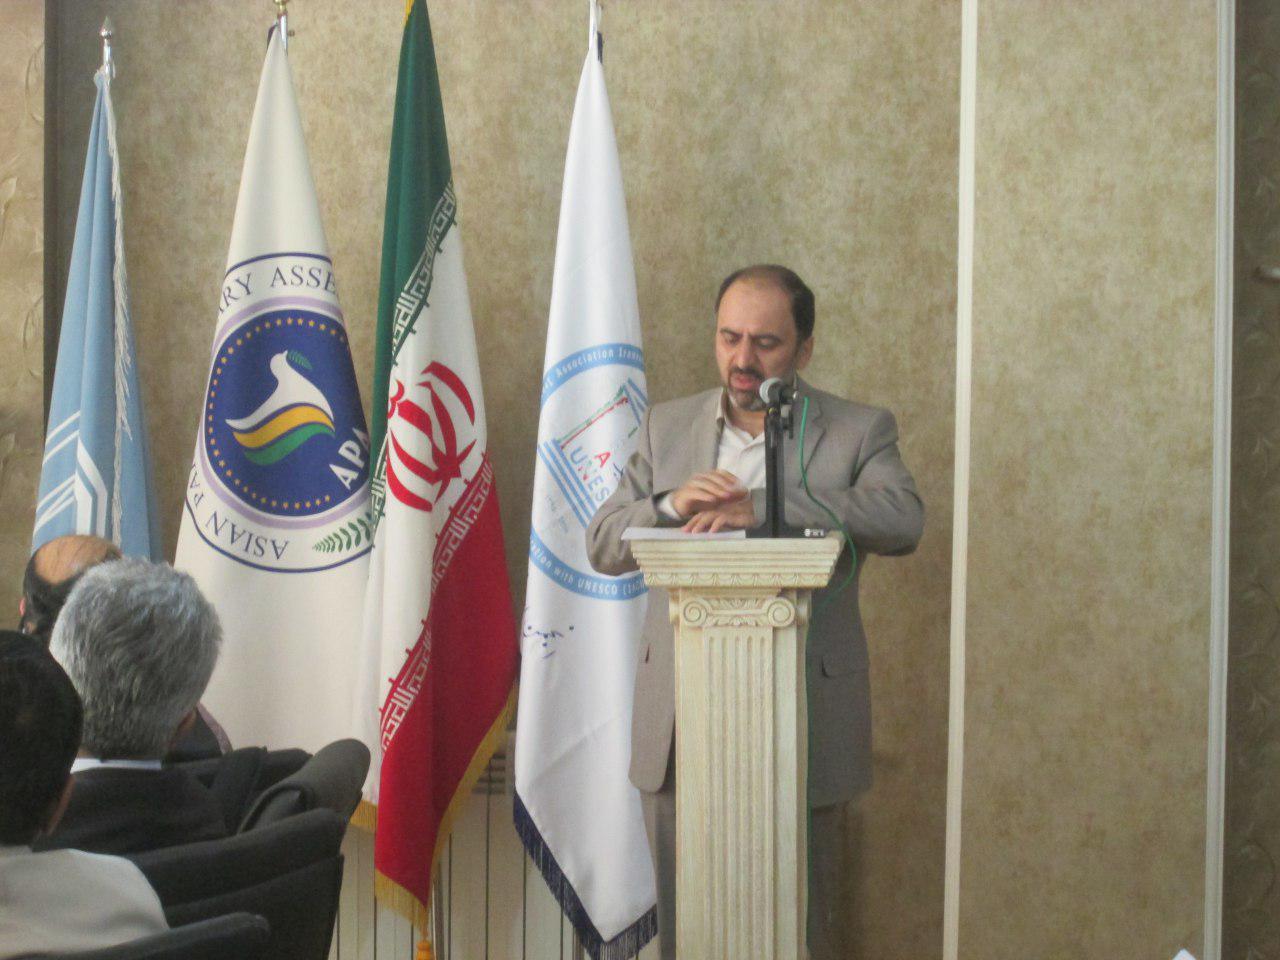 Dr. Akrami, representative of the Ministry of Health & Medical Education of I.R. Iran and member of the National Committee on Bio Ethics and Ethics in Science and Technology